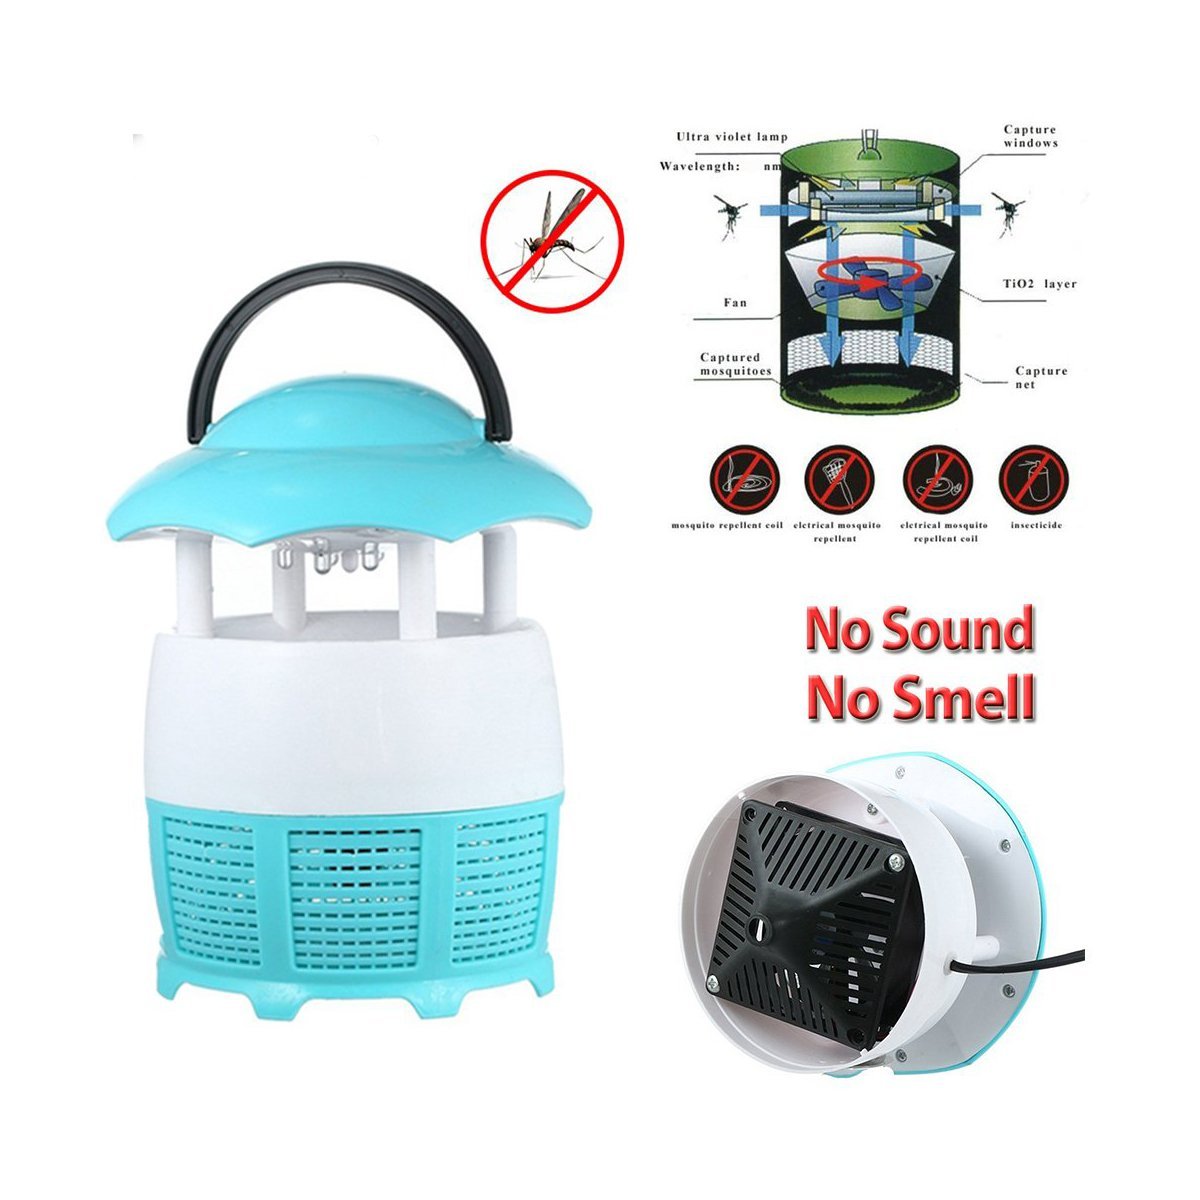 mini-home-photocatalyst-mosquito-lampsfly-killer-no-radiationelectronic-mosquito-catching-machine-z1-electric-insect-killer-lantern